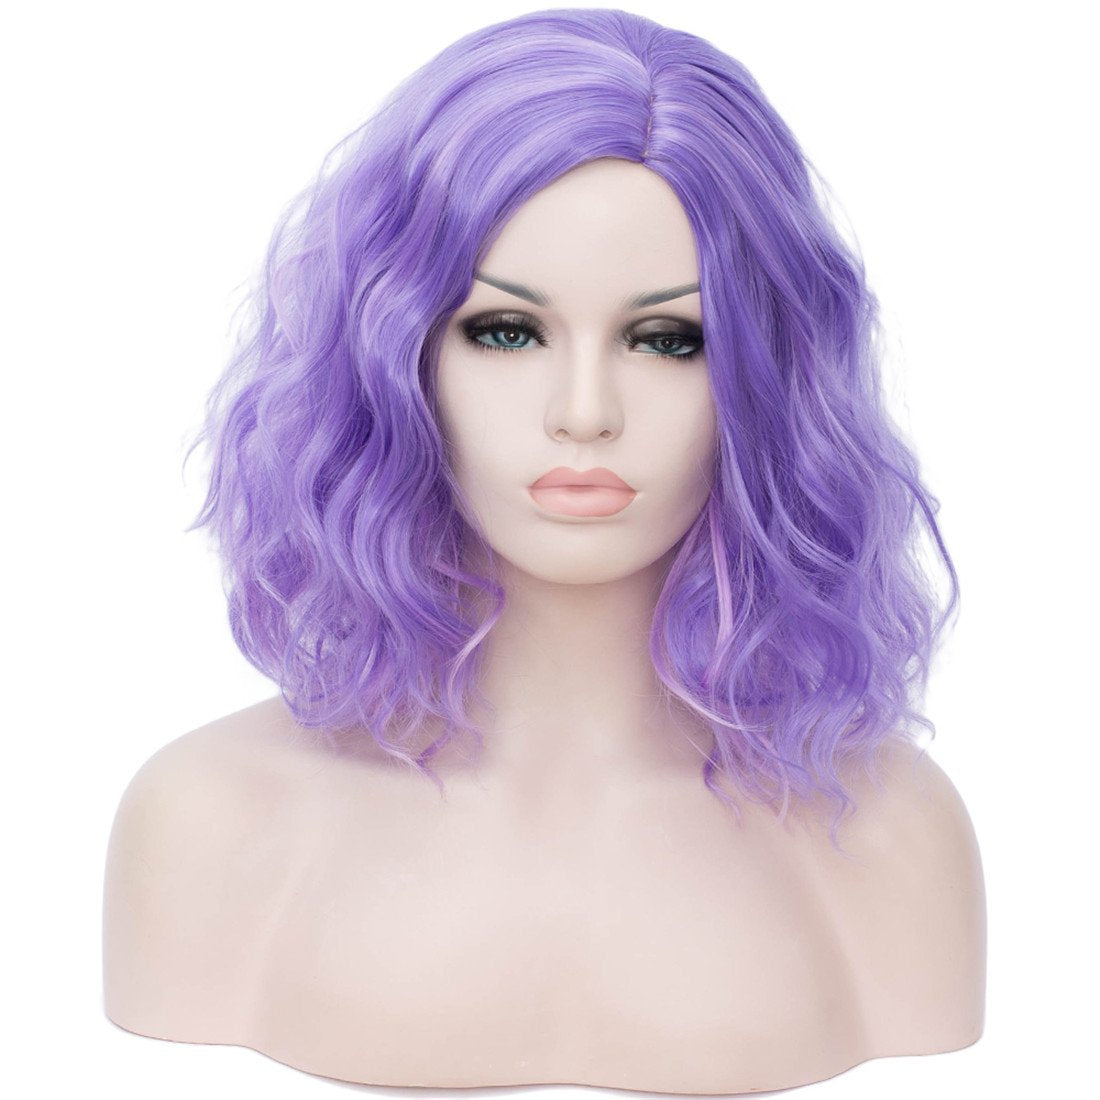 light purple wig HAIR Synthetic Curly Bob Wig with Bangs Short Bob Wavy Hair Wigs Wine Red Color Wigs for Women Bob Style Synthetic Heat Resistant Bob Wigs.